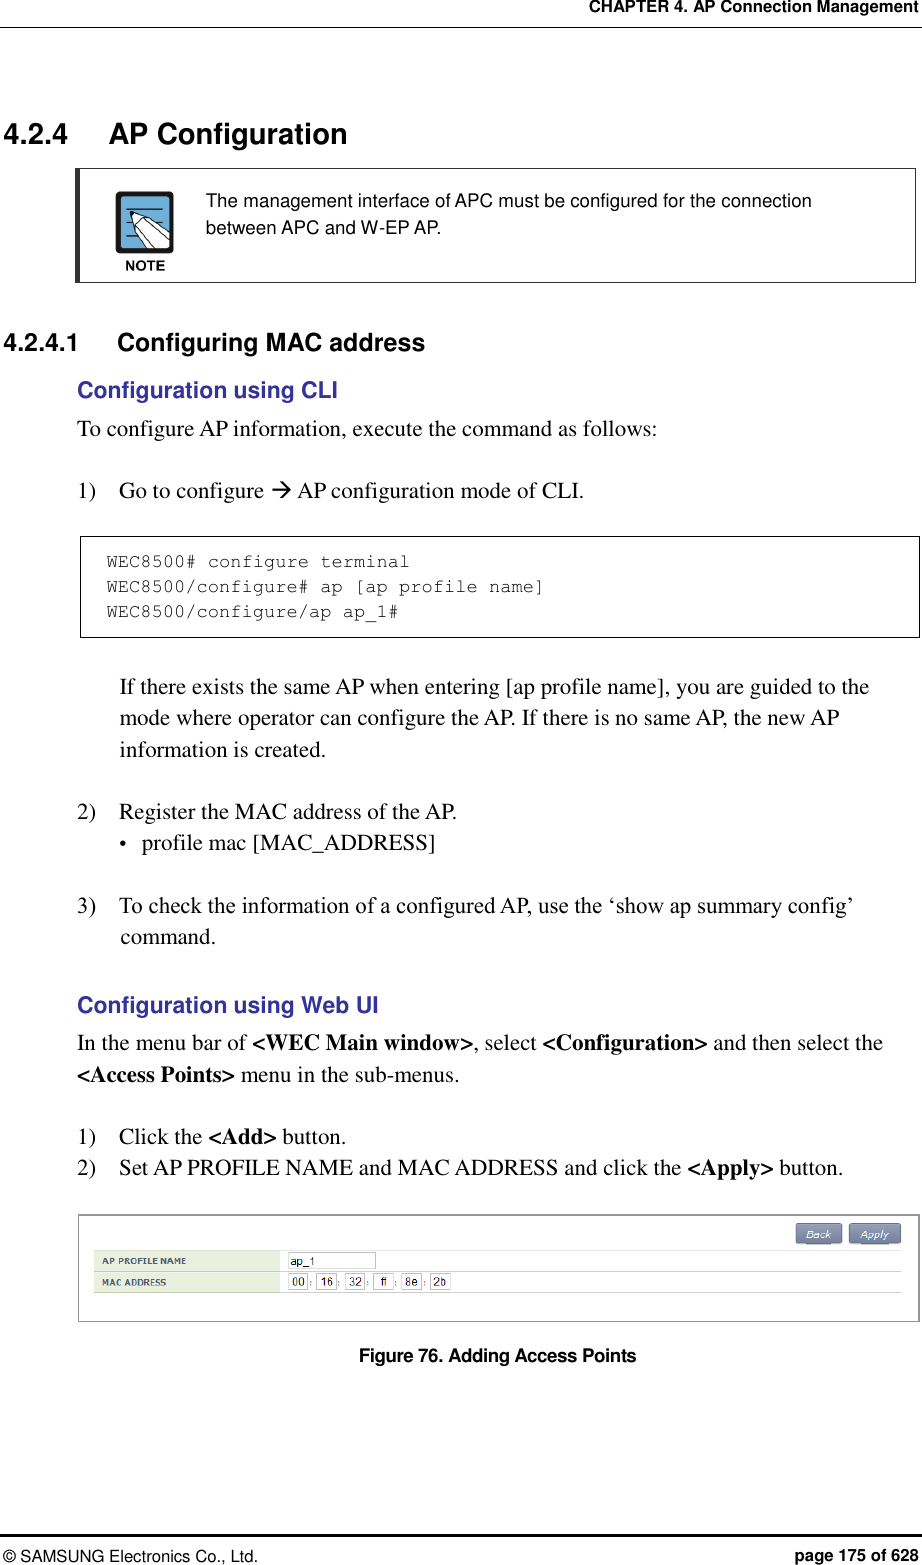 CHAPTER 4. AP Connection Management ©  SAMSUNG Electronics Co., Ltd.  page 175 of 628 4.2.4  AP Configuration   The management interface of APC must be configured for the connection between APC and W-EP AP.   4.2.4.1  Configuring MAC address Configuration using CLI To configure AP information, execute the command as follows:    1)    Go to configure  AP configuration mode of CLI.  WEC8500# configure terminal WEC8500/configure# ap [ap profile name] WEC8500/configure/ap ap_1#  If there exists the same AP when entering [ap profile name], you are guided to the mode where operator can configure the AP. If there is no same AP, the new AP information is created.  2)    Register the MAC address of the AP.  profile mac [MAC_ADDRESS]  3)    To check the information of a configured AP, use the ‘show ap summary config’ command.  Configuration using Web UI In the menu bar of &lt;WEC Main window&gt;, select &lt;Configuration&gt; and then select the &lt;Access Points&gt; menu in the sub-menus.    1)    Click the &lt;Add&gt; button. 2)    Set AP PROFILE NAME and MAC ADDRESS and click the &lt;Apply&gt; button.  Figure 76. Adding Access Points  